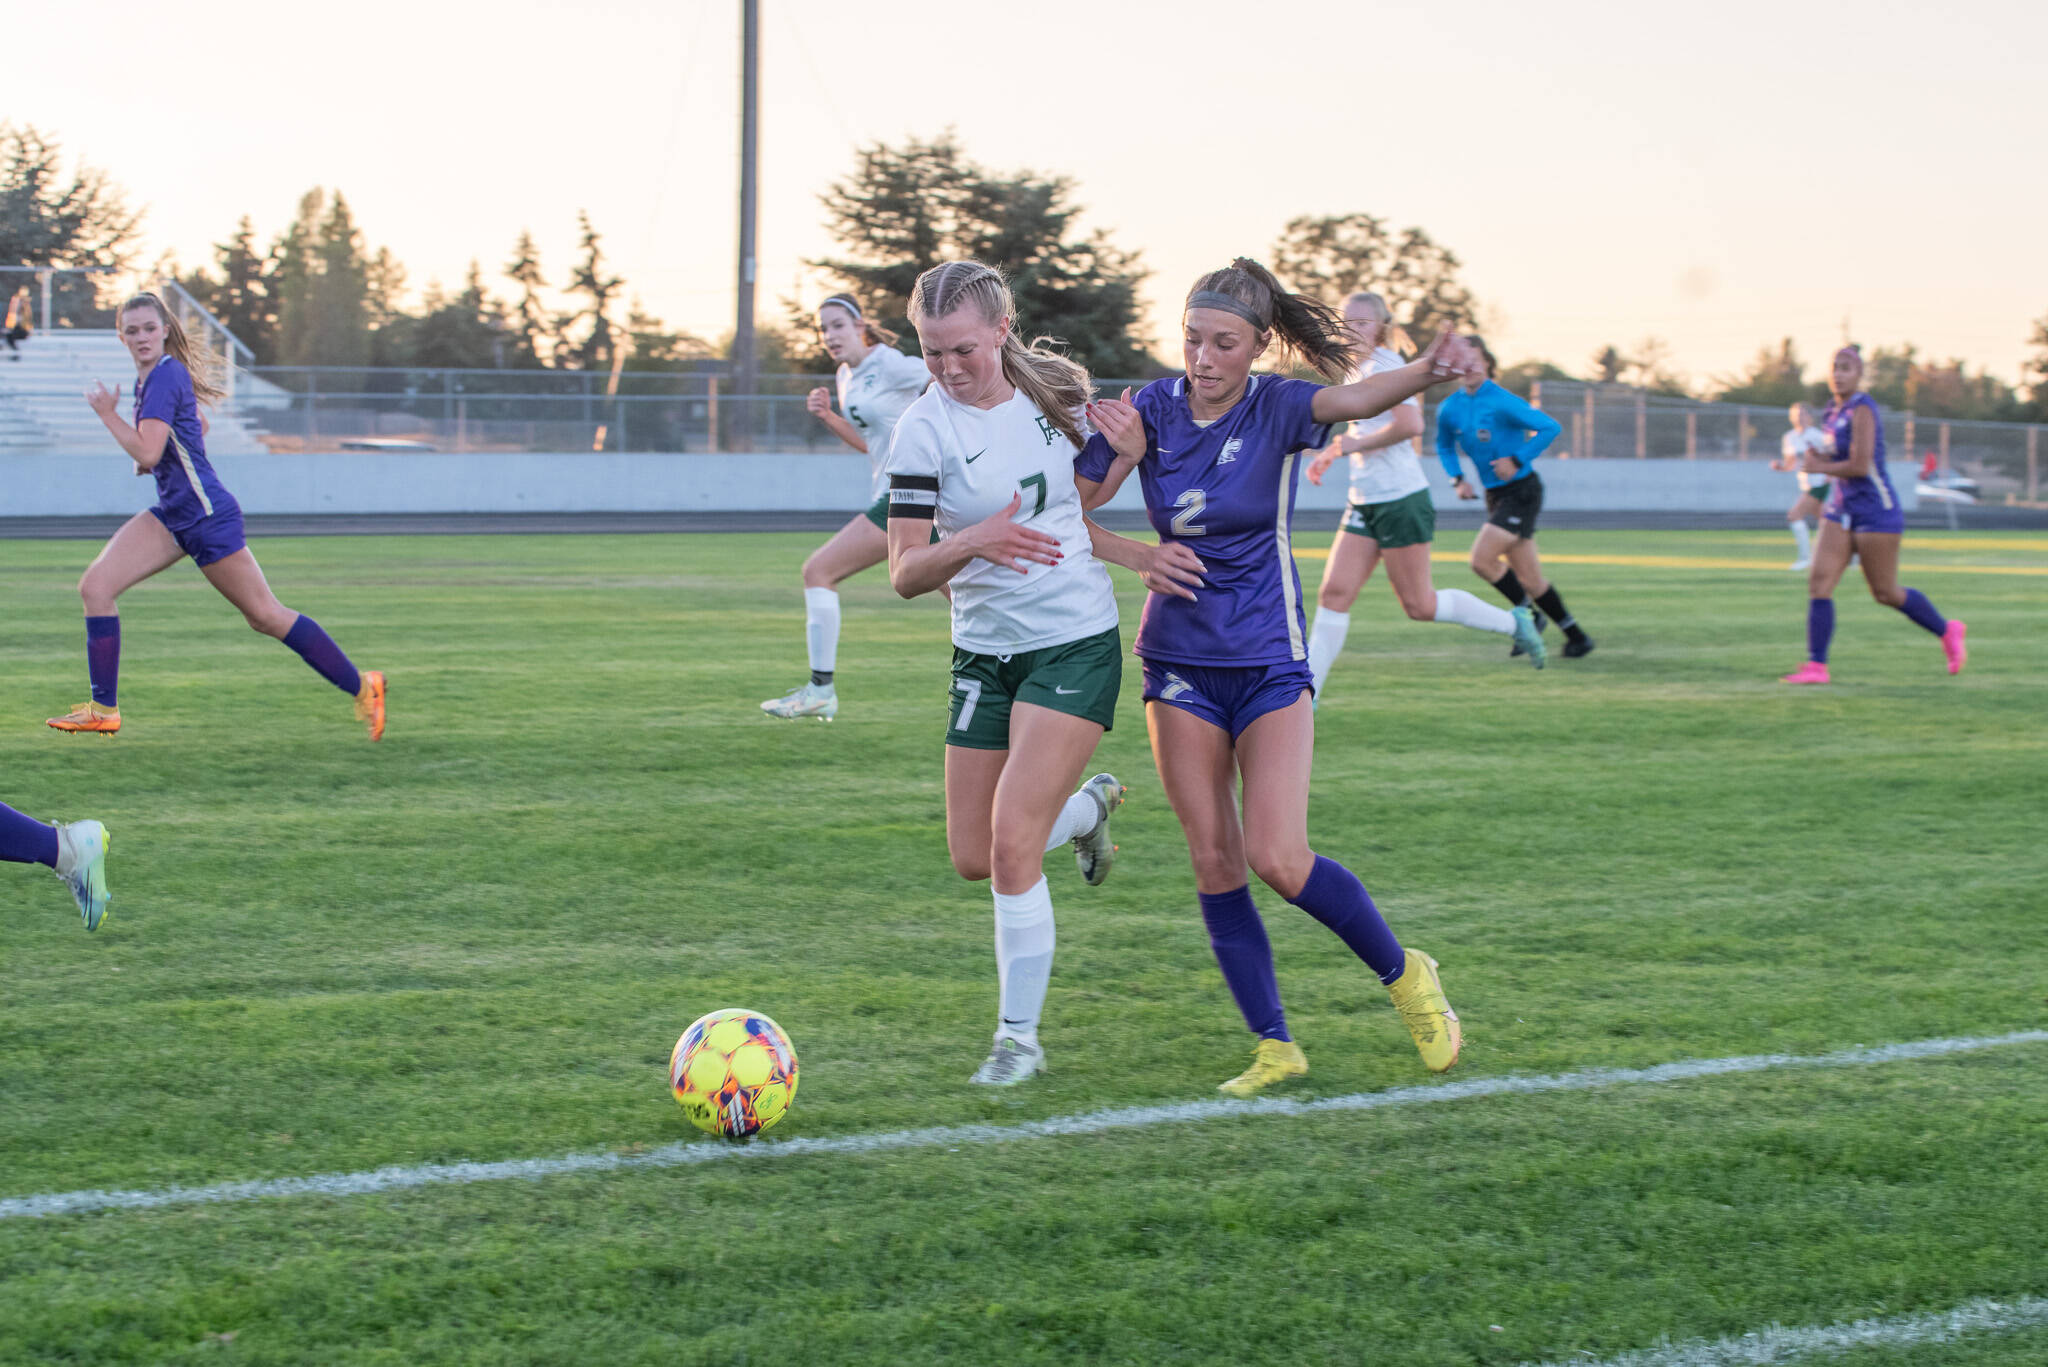 Emily Matthiessen (2)/Olympic Peninsula News Group
Port Angeles’ Izzy Felton, left, and Sequim’s Mikiah Winter jostle for possession of the ball along the sideline during the first half of the Wolves 2-1 Rainshadow Rumble girls soccer victory.